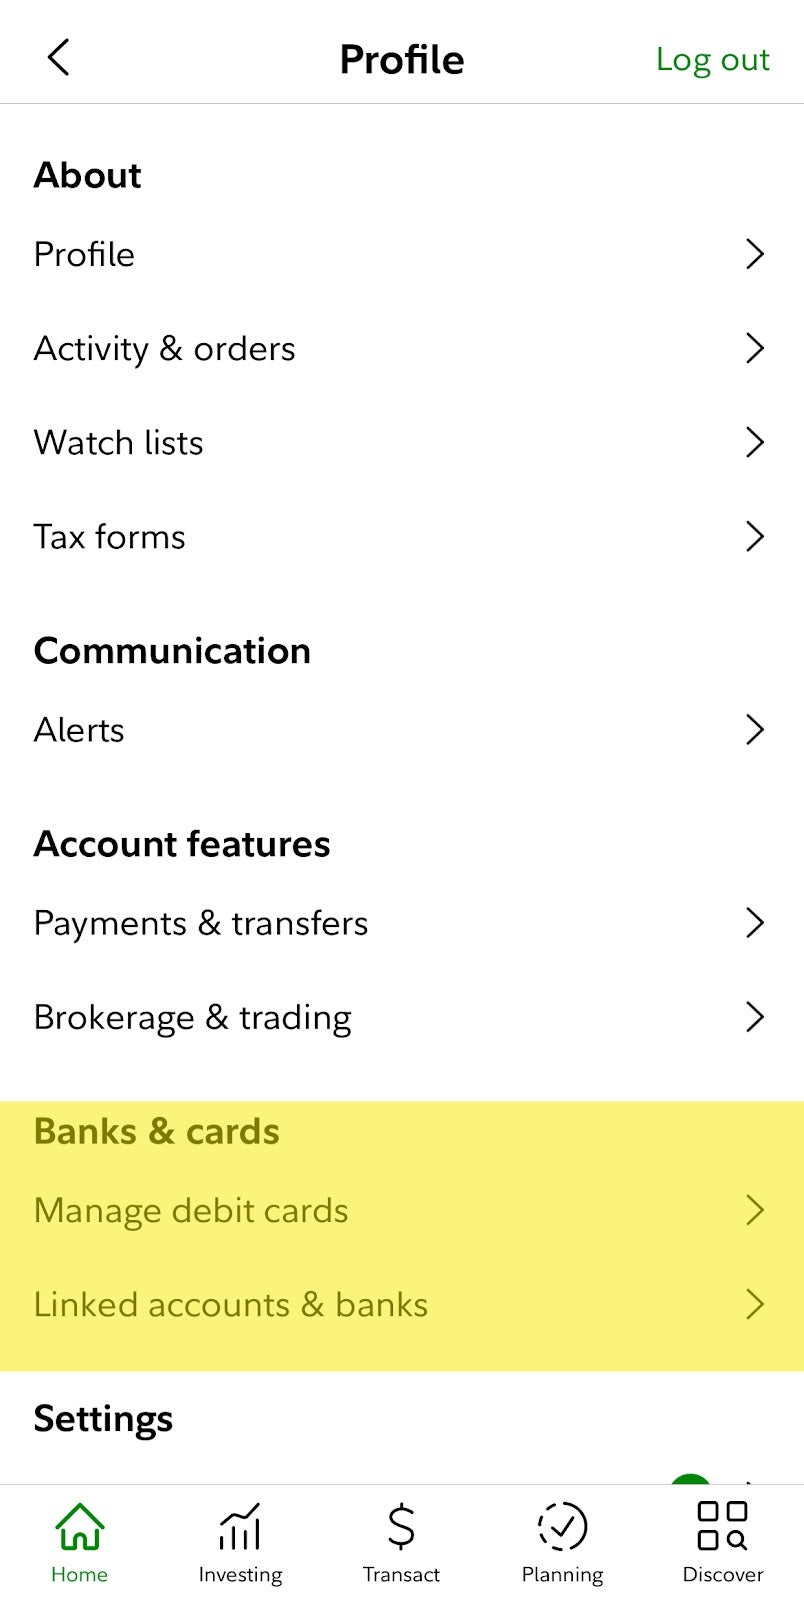 fidelity app interface for profile